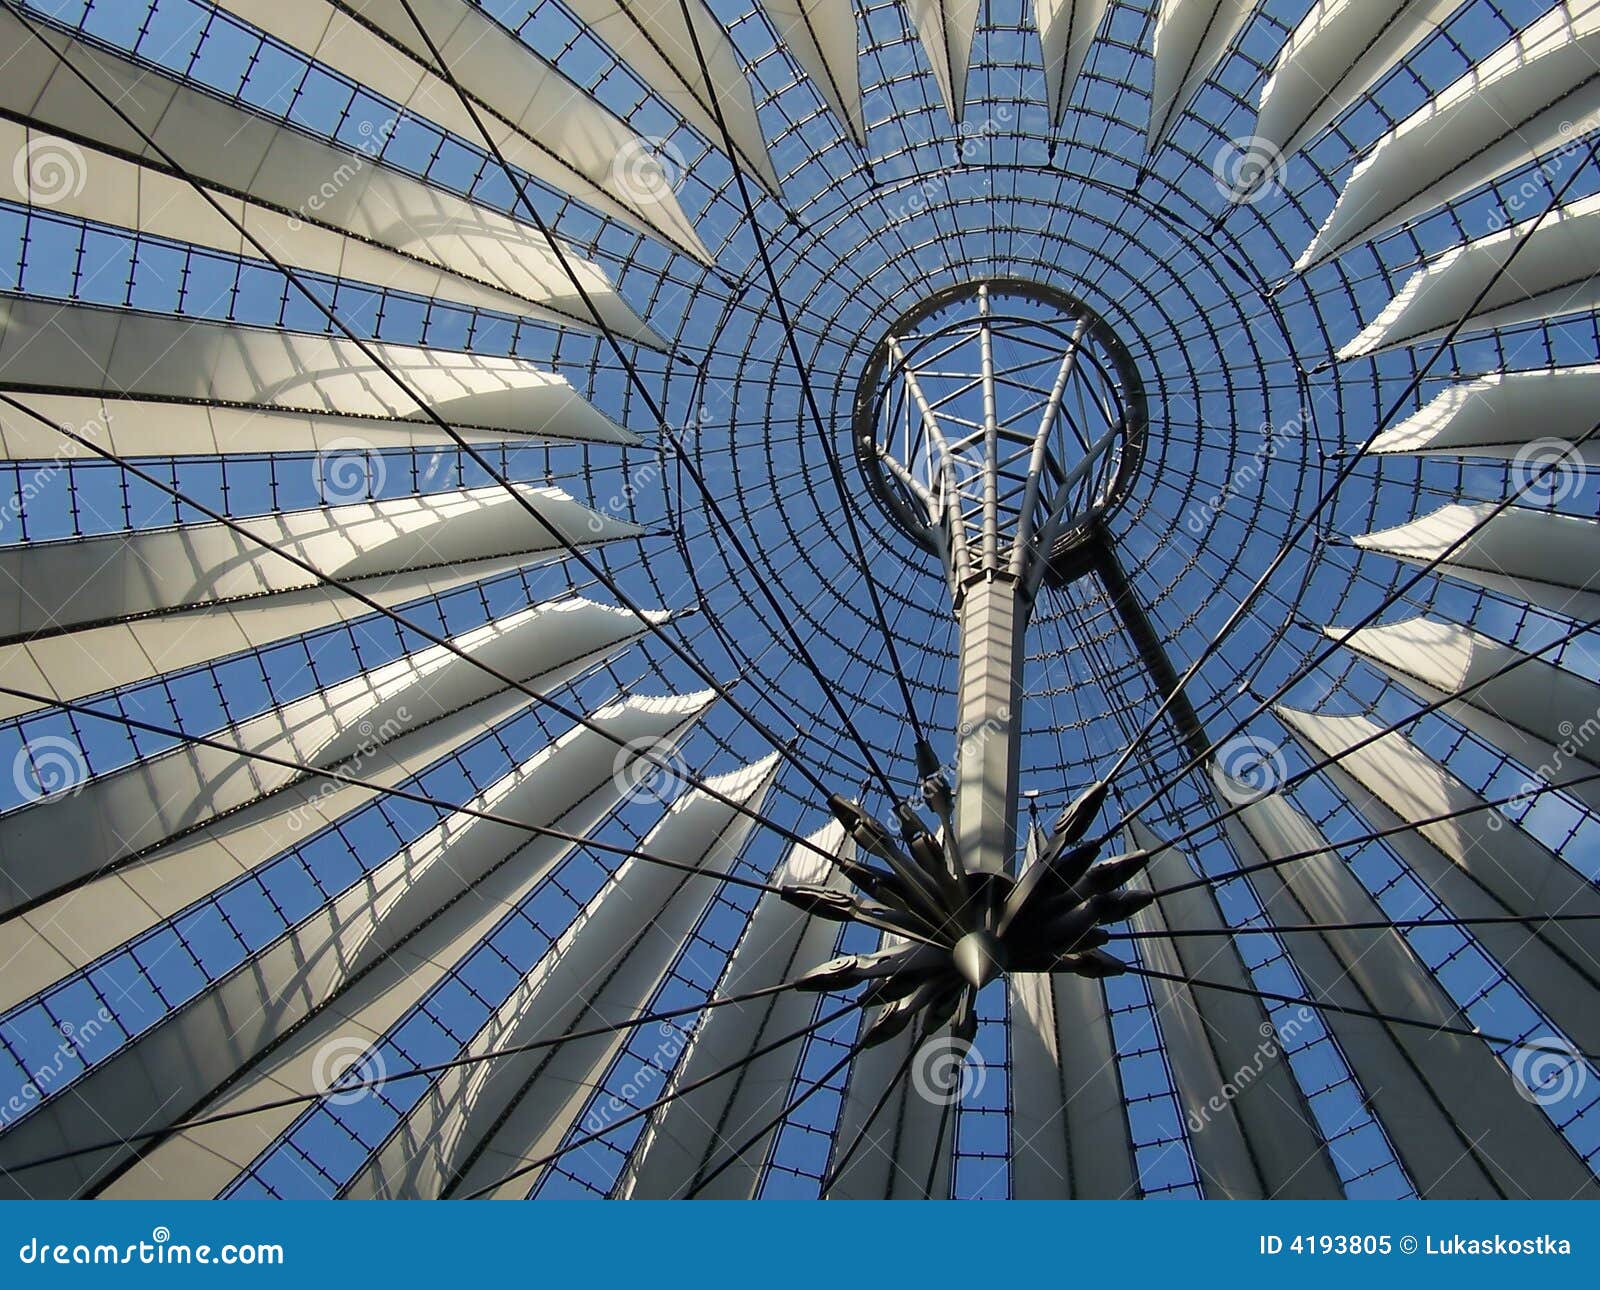 the roof of sony center